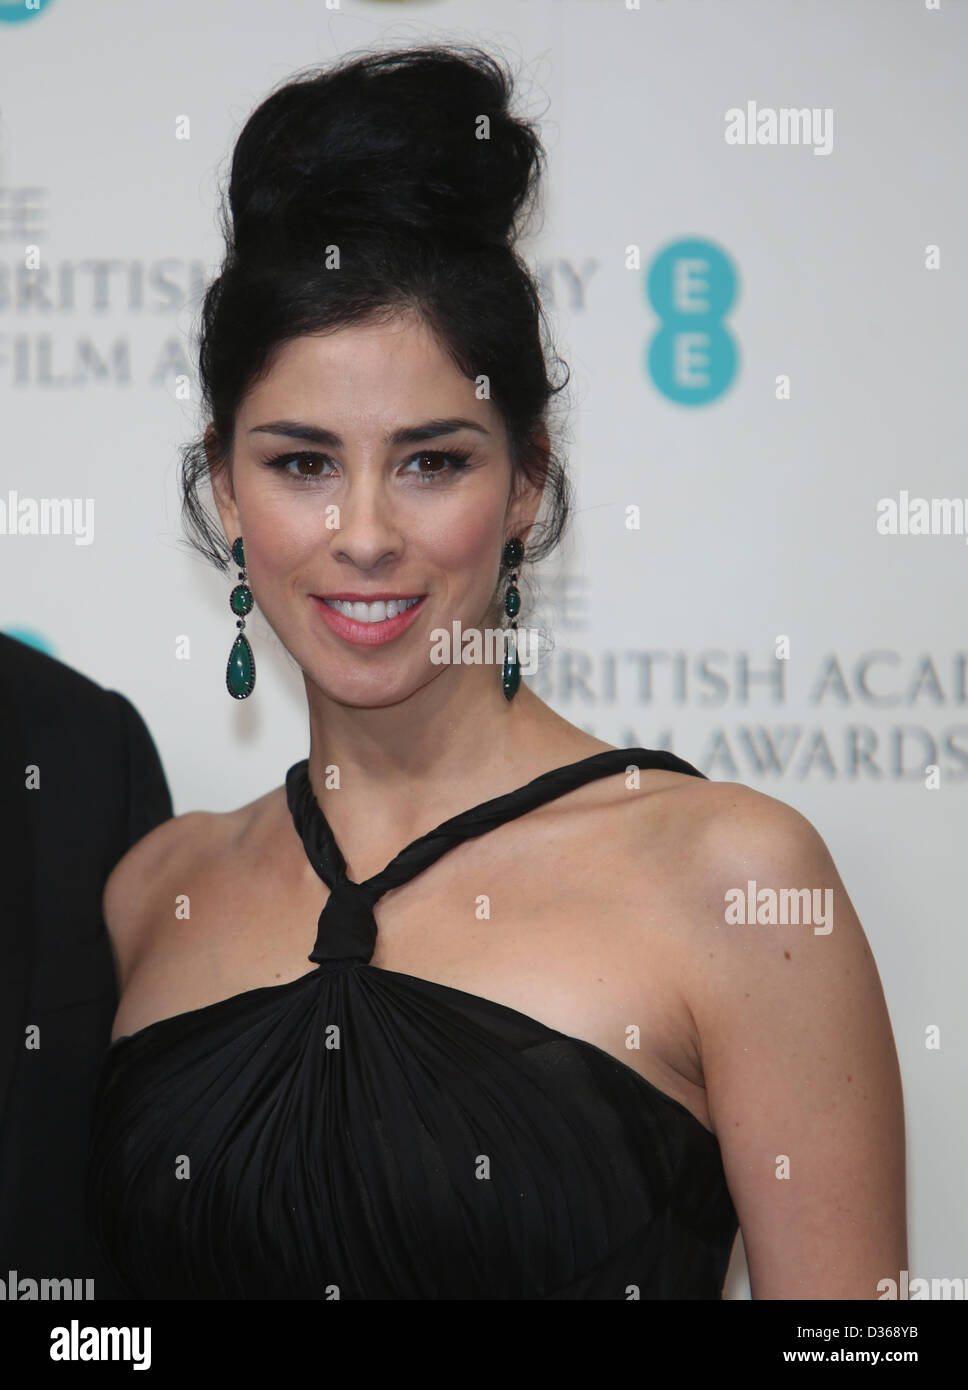 Actress Sarah Silverman arrives at the EE British Academy Film Awards at The Royal Opera House in London, England, on 10 February 2013. Photo: Hubert Boesl Stock Photo